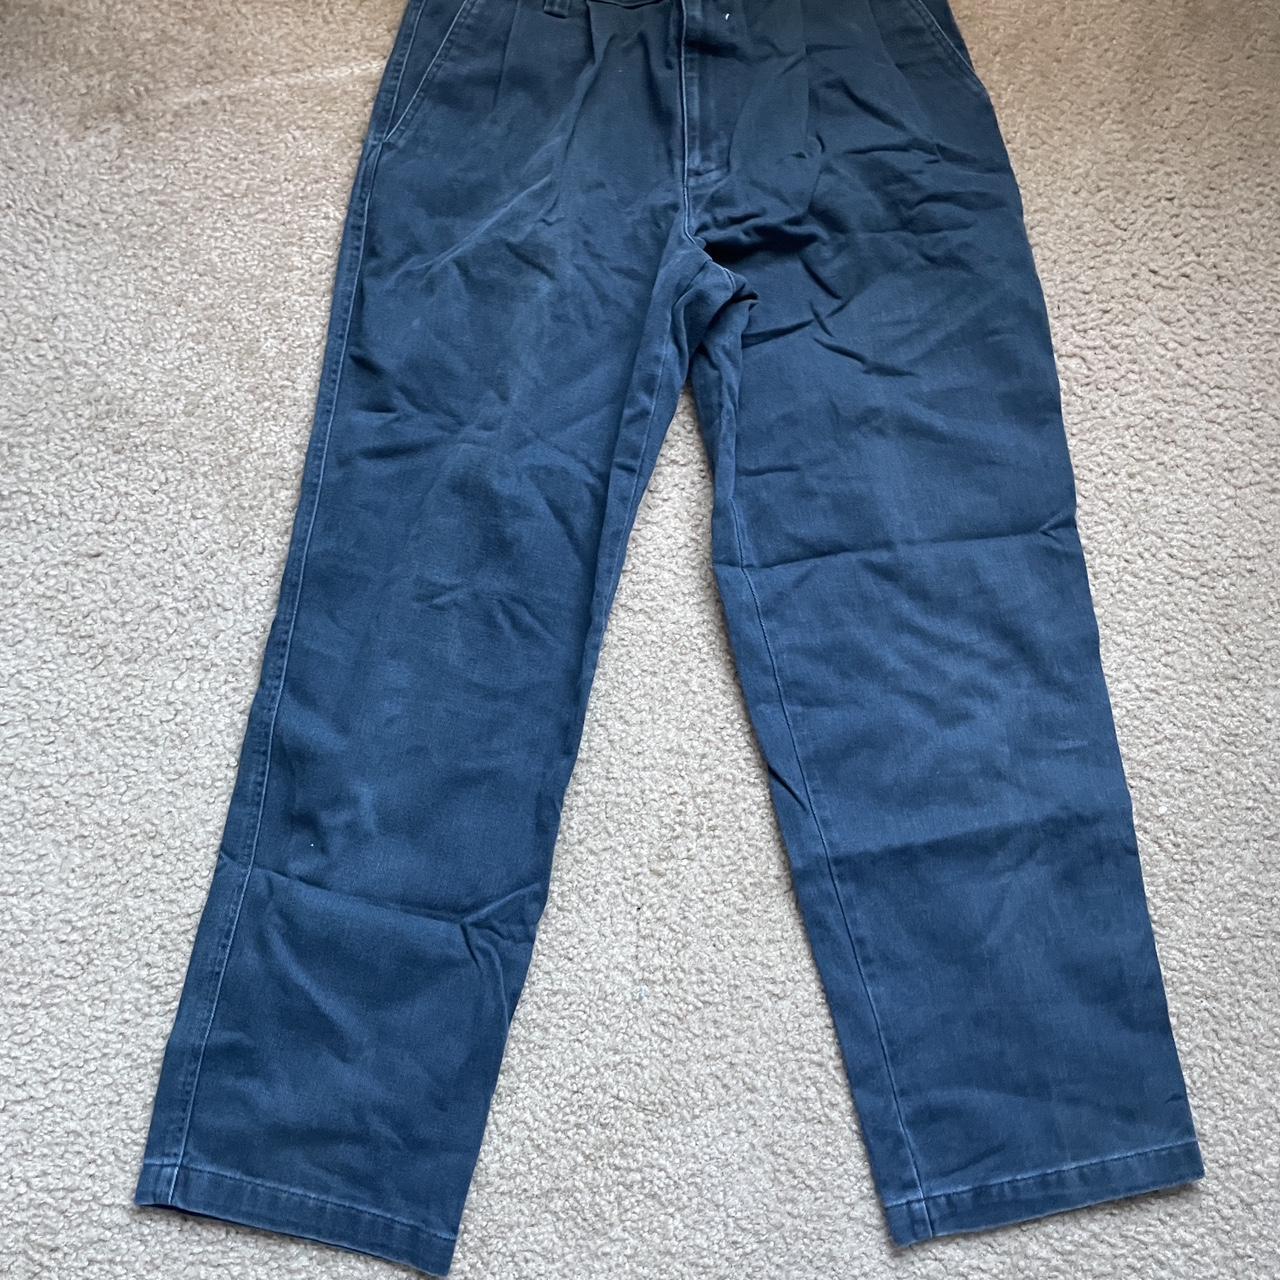 Downtown grunge boy corduroy pants that looks with a... - Depop